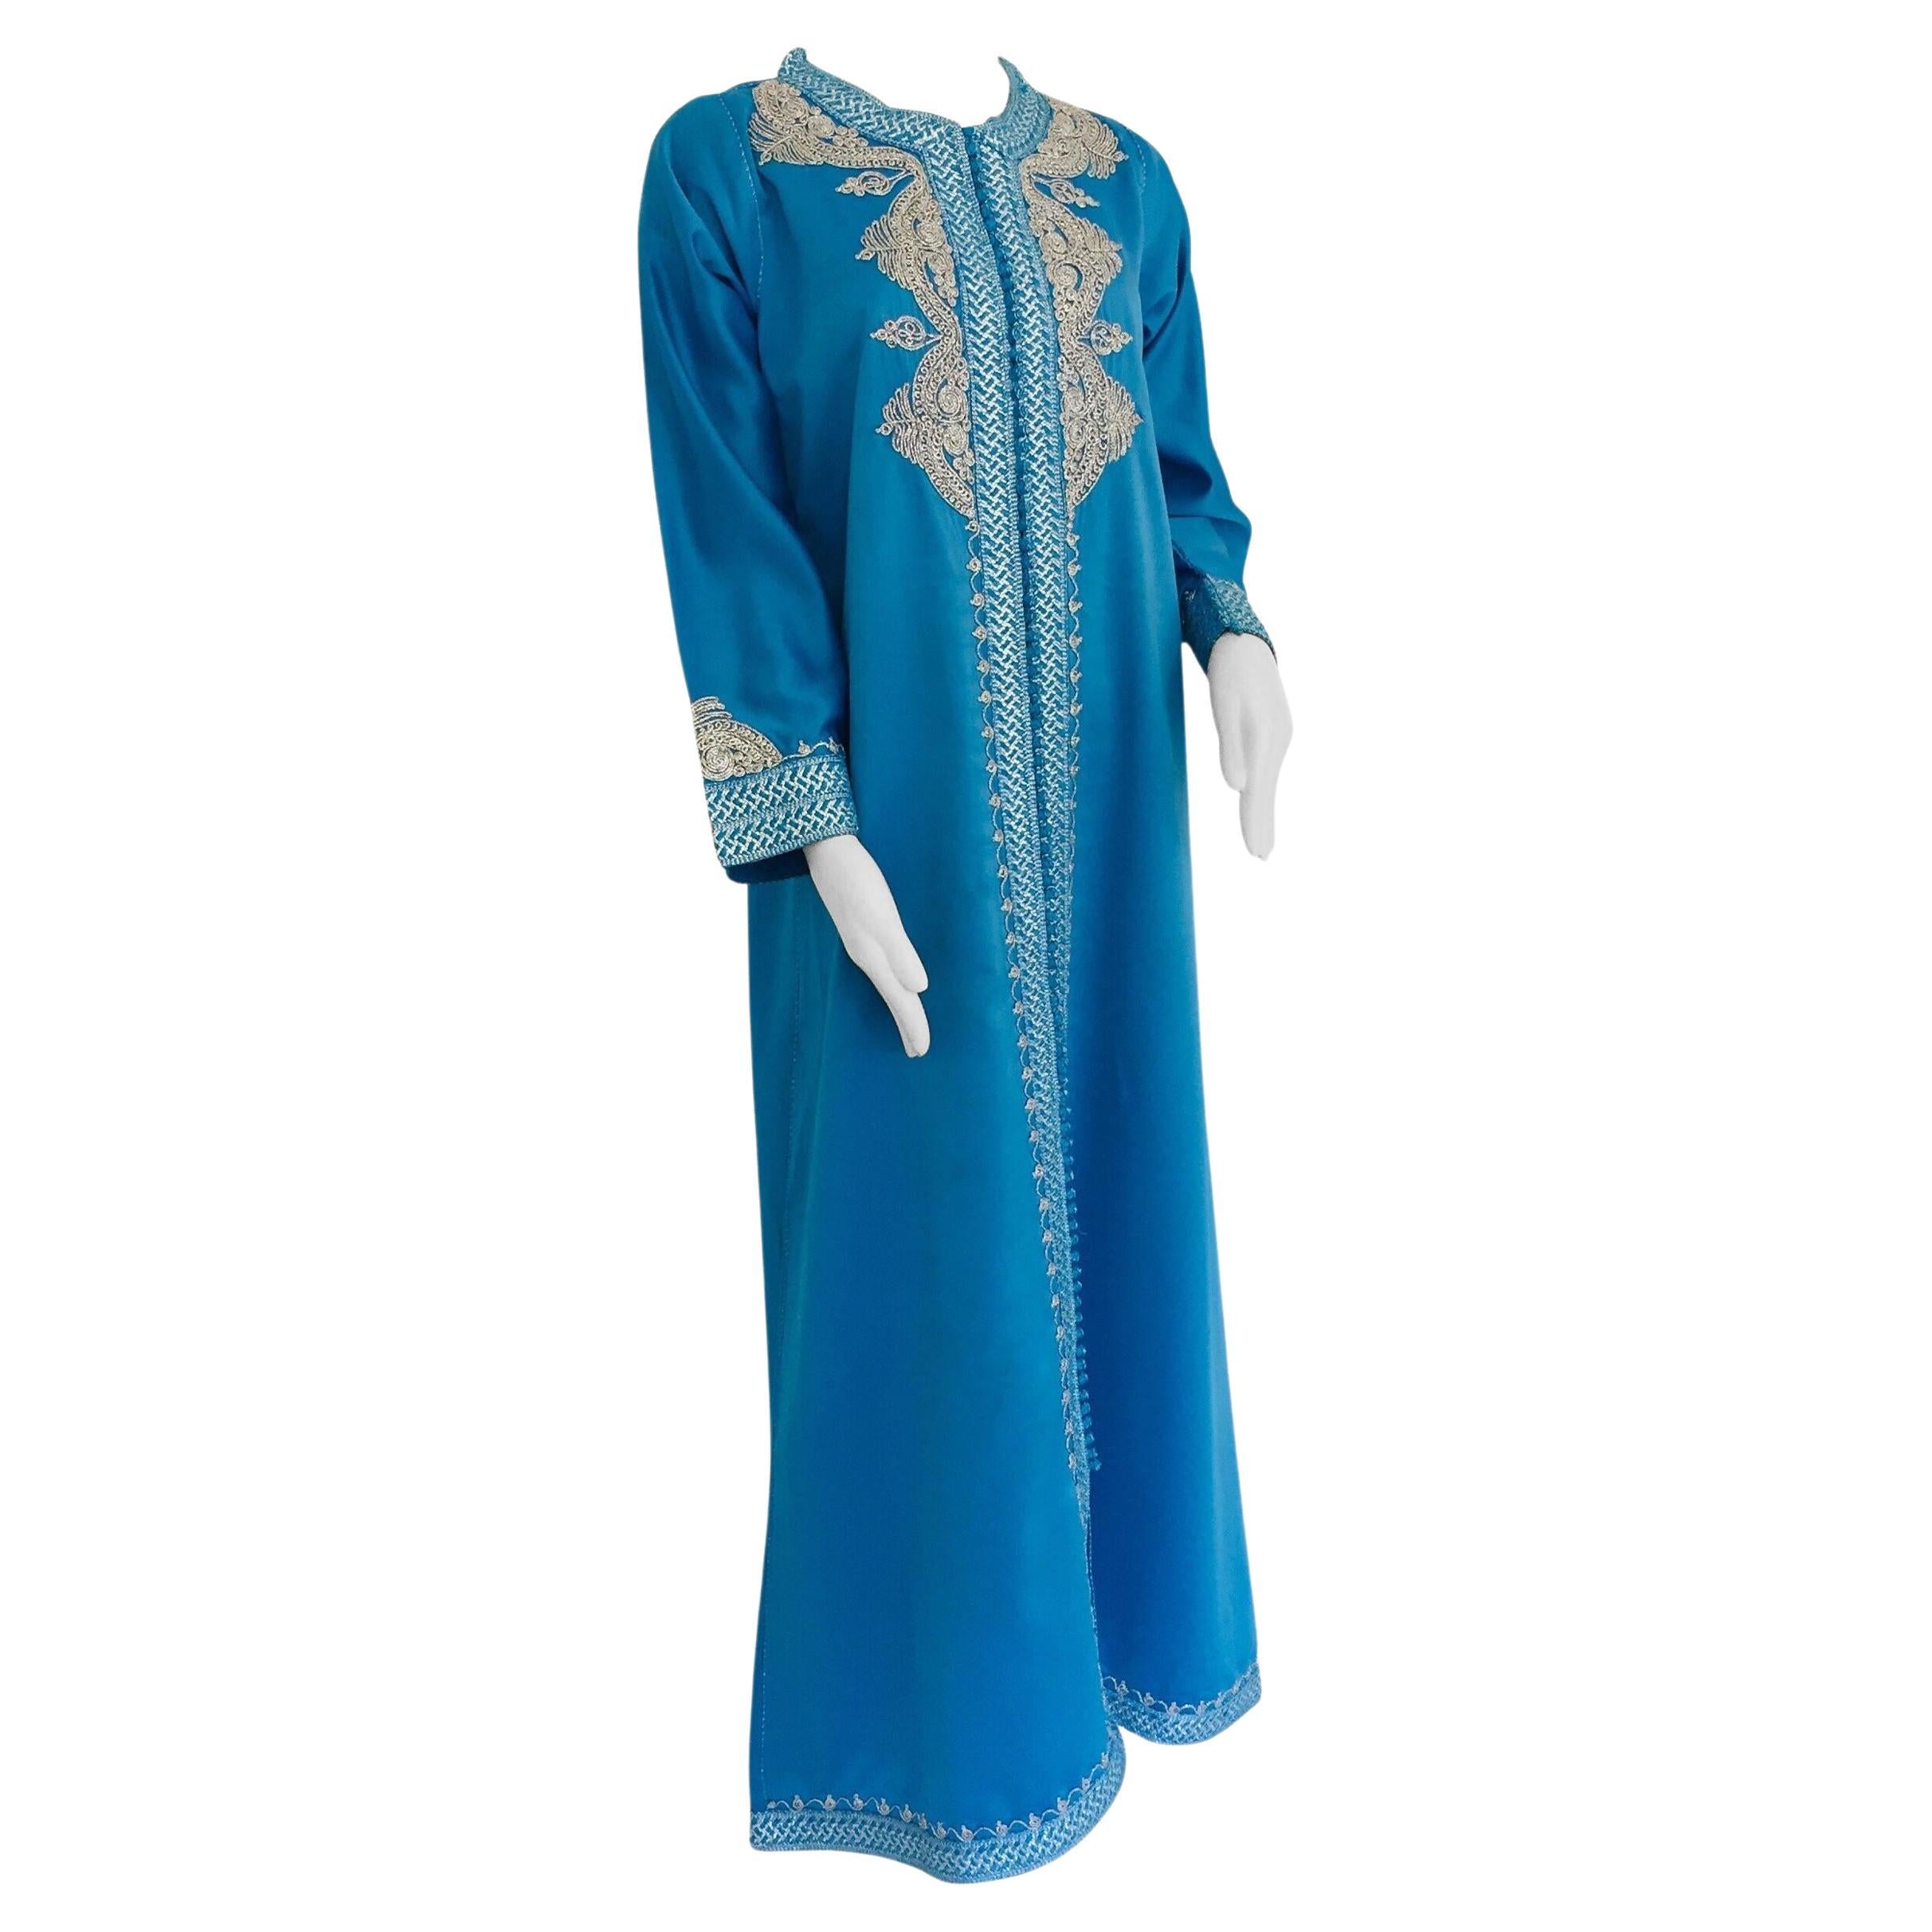 Moroccan Kaftan in Turquoise Blue and Silver For Sale